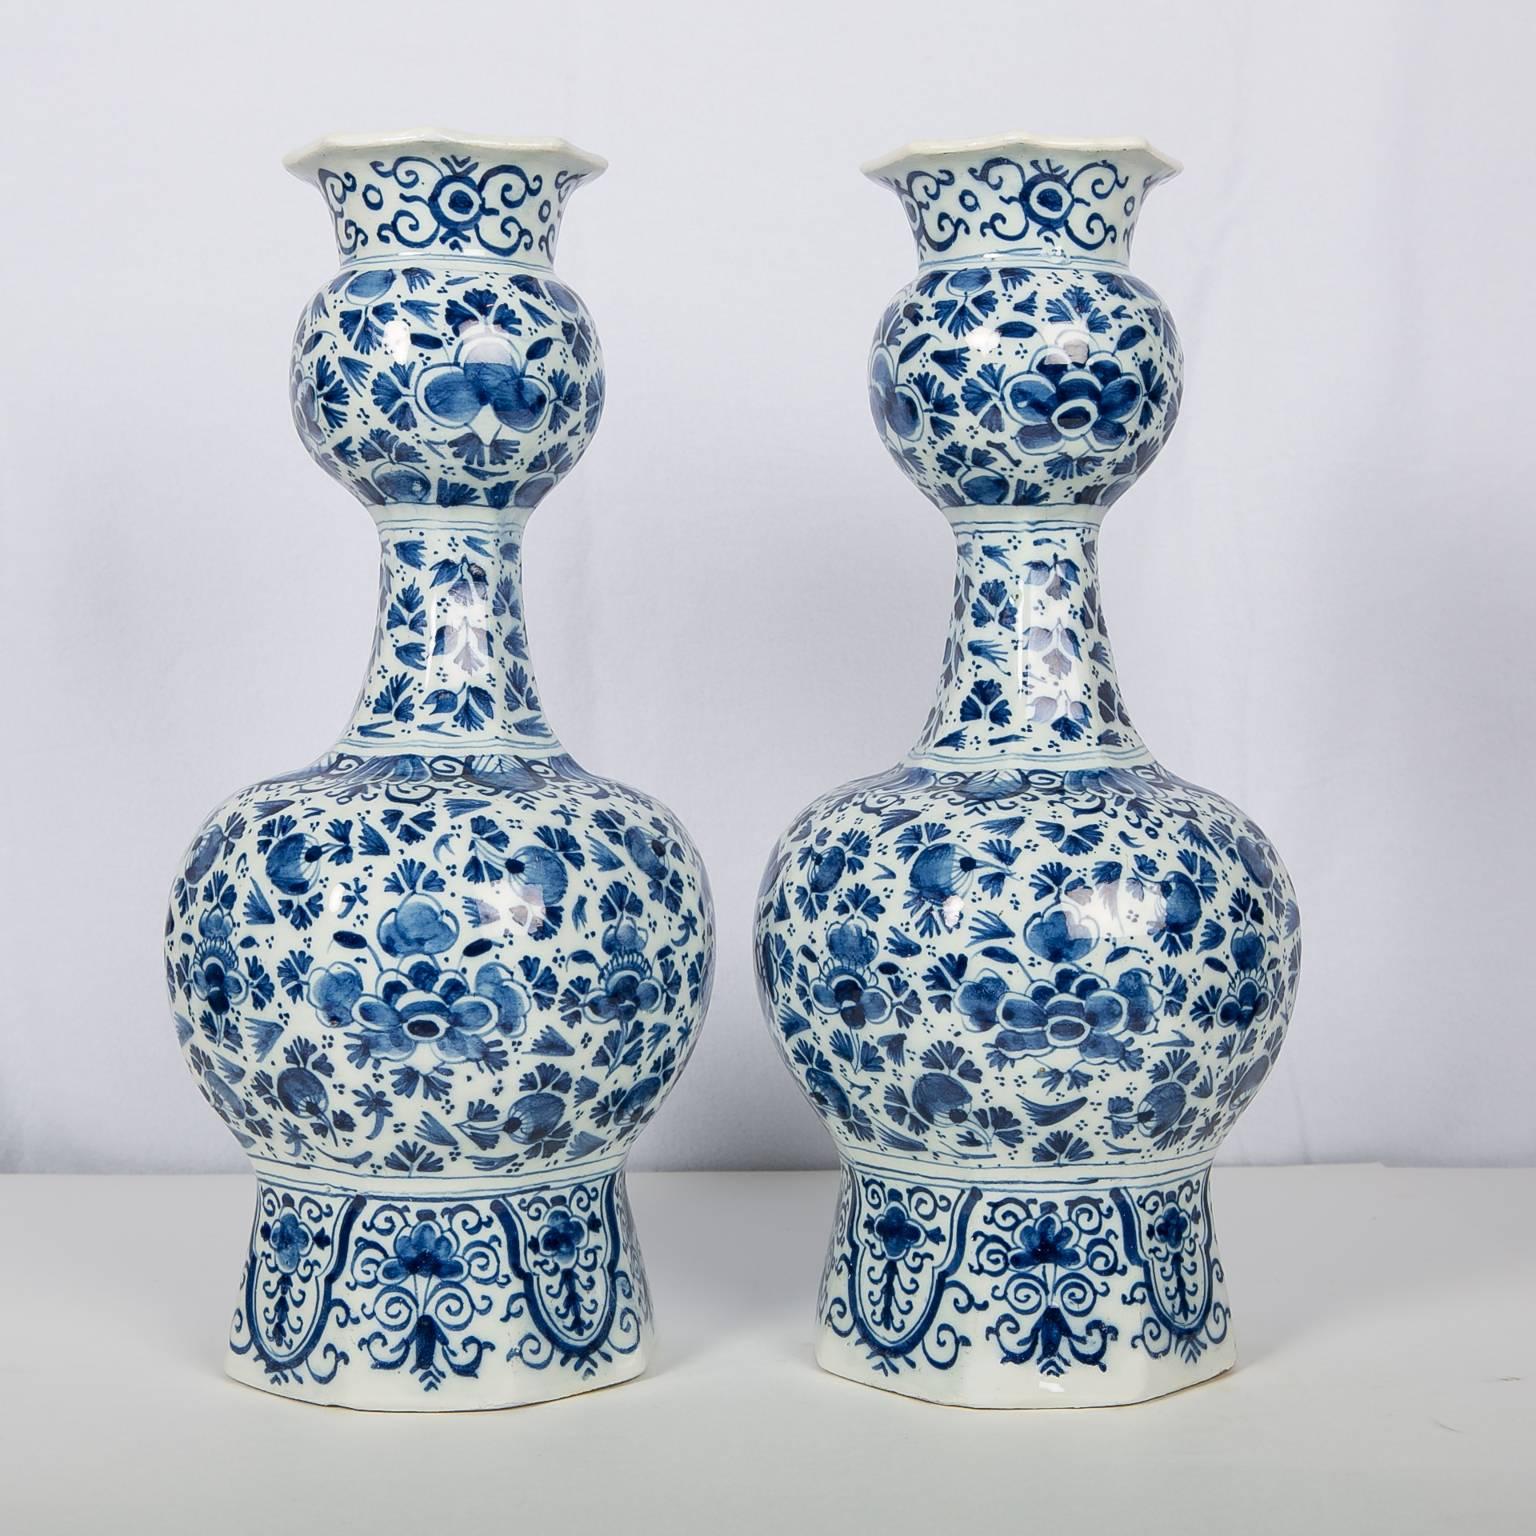 An exqusite pair of Blue and White Dutch Delft vases hand-painted in a medium cobalt blue with an all around scene in the 